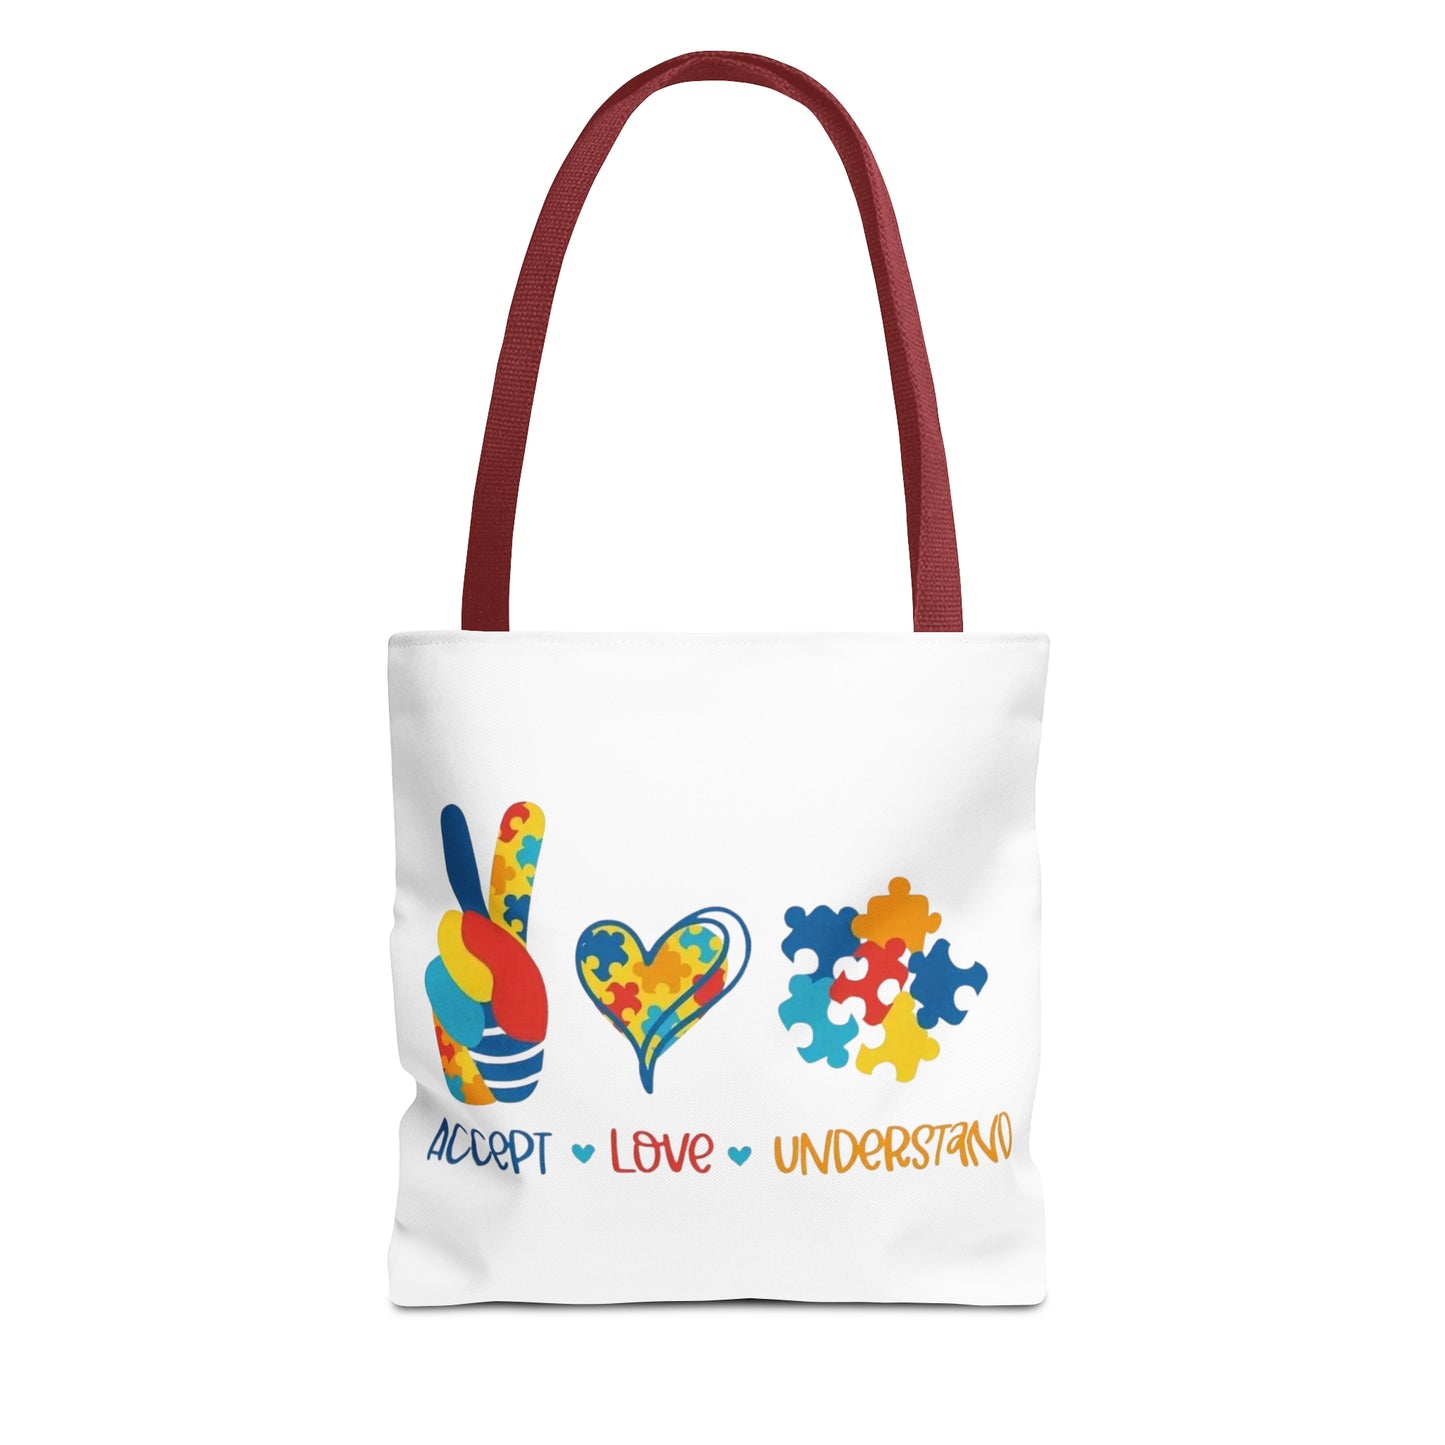 Accept Love & Understand Tote Bag